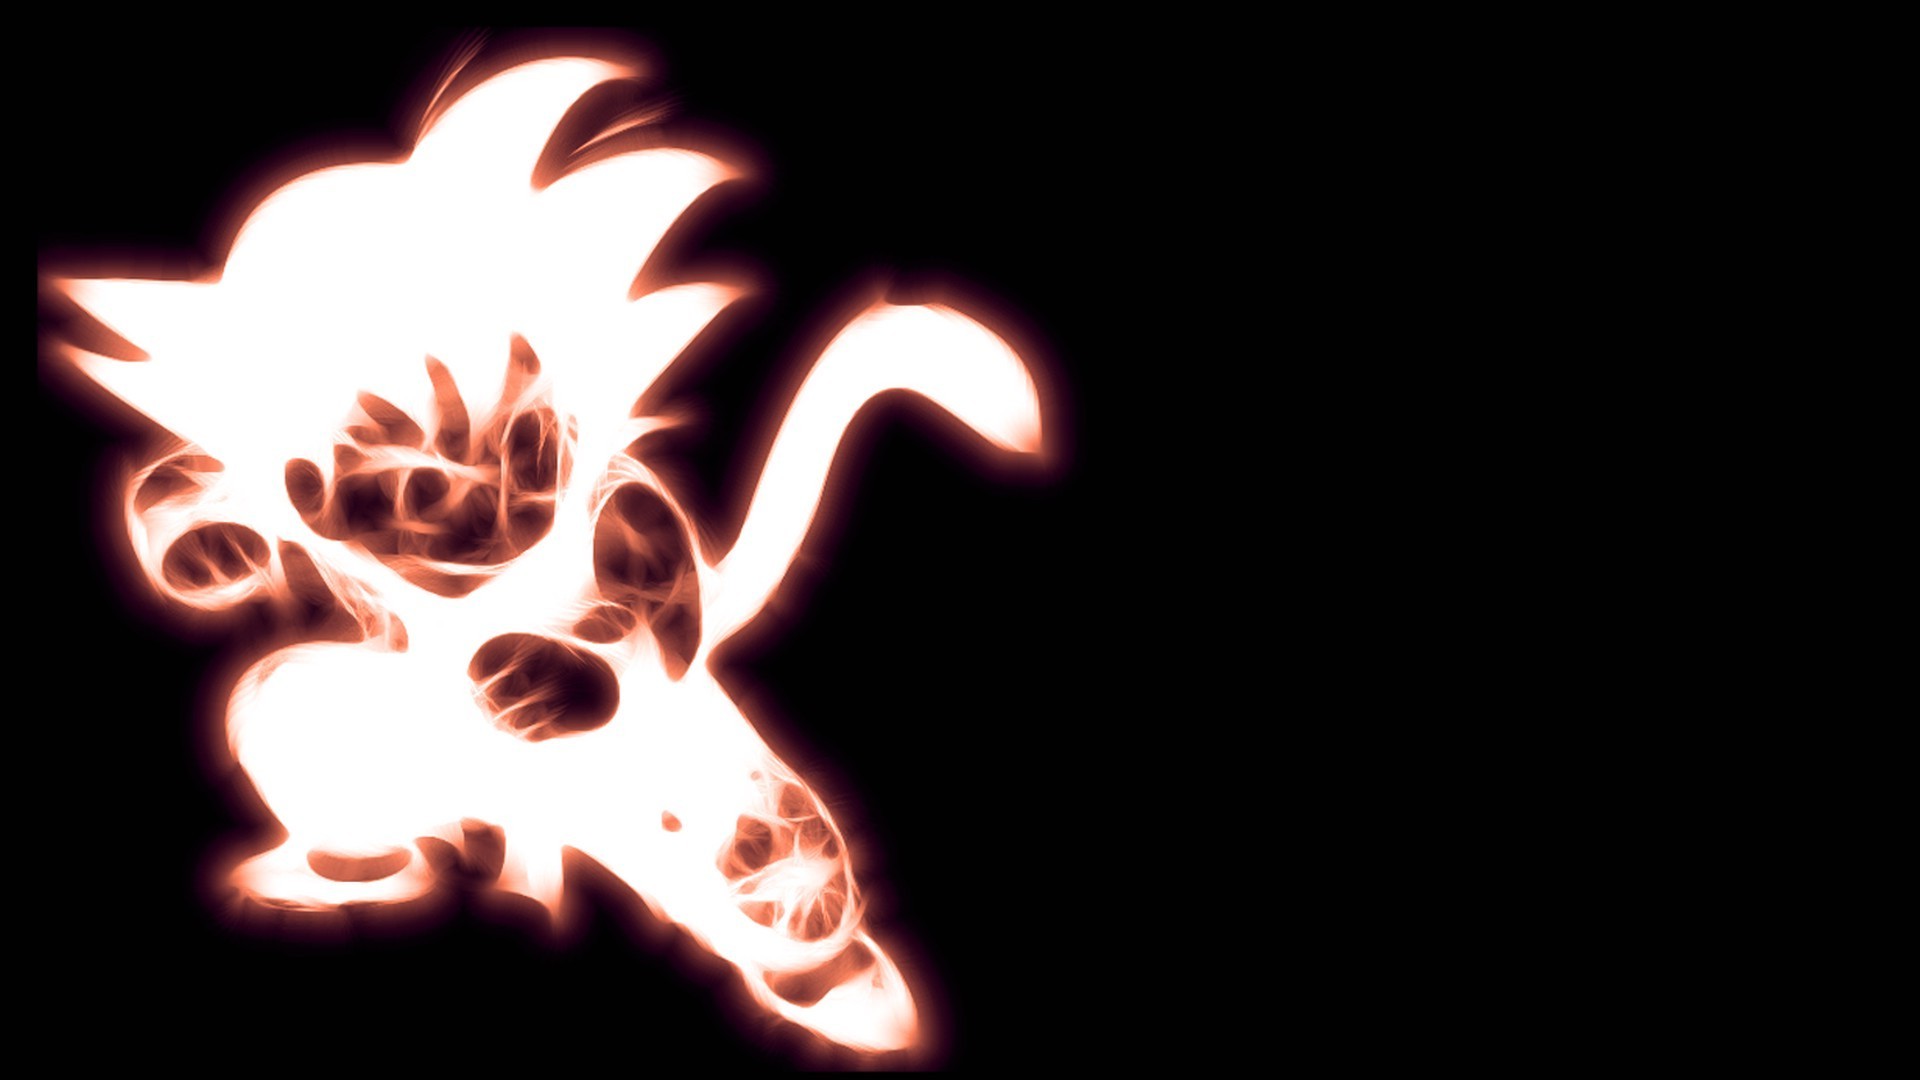 Wallpaper Kid Goku HD With Resolution 1920X1080 pixel. You can make this wallpaper for your Desktop Computer Backgrounds, Mac Wallpapers, Android Lock screen or iPhone Screensavers